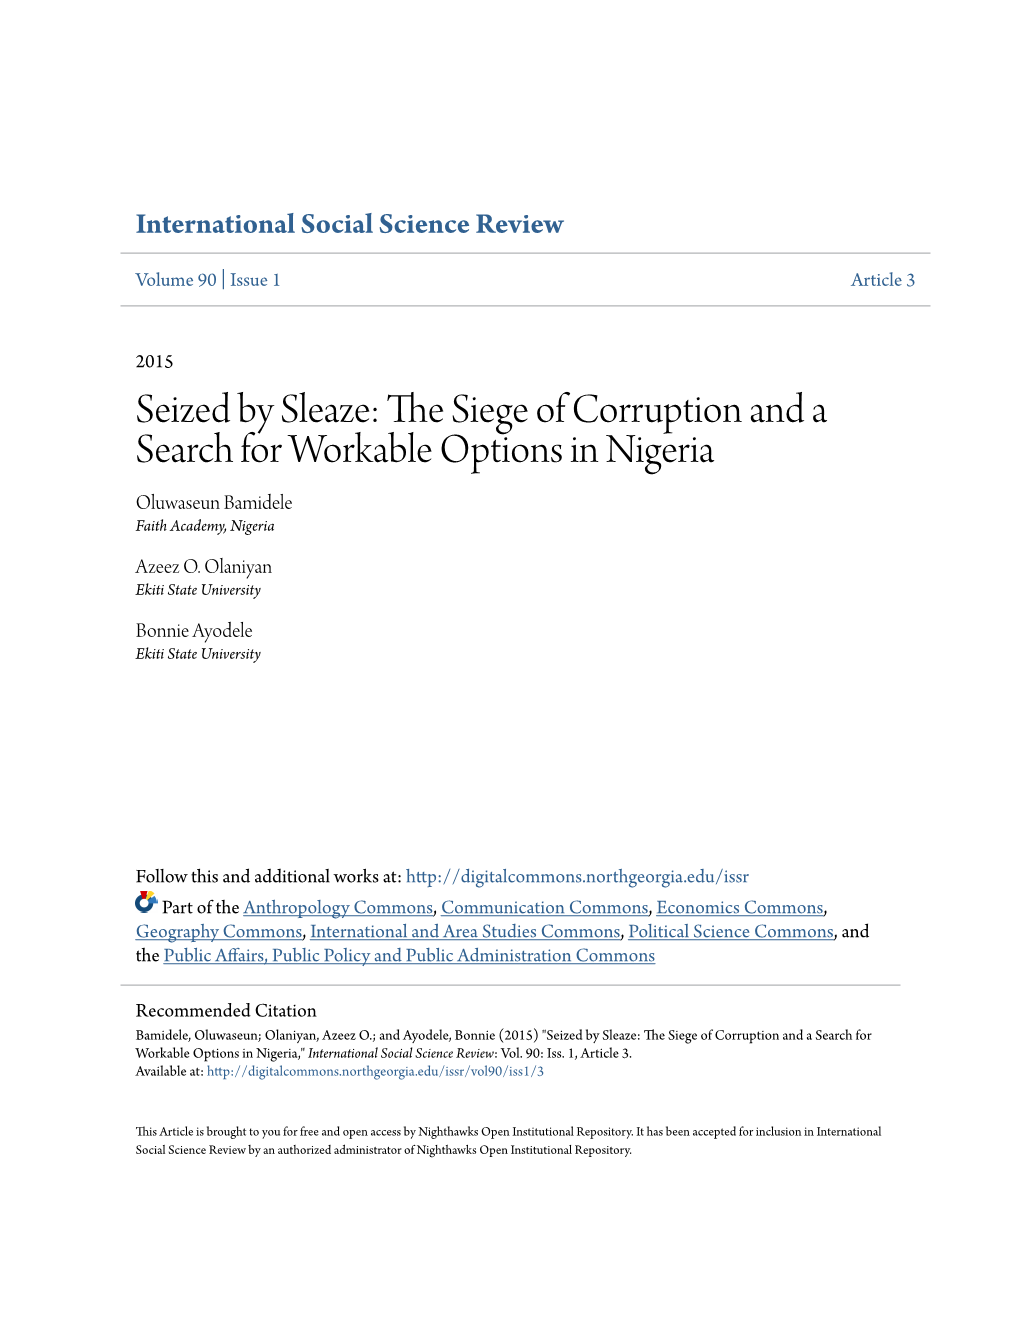 The Siege of Corruption and a Search for Workable Options in Nigeria